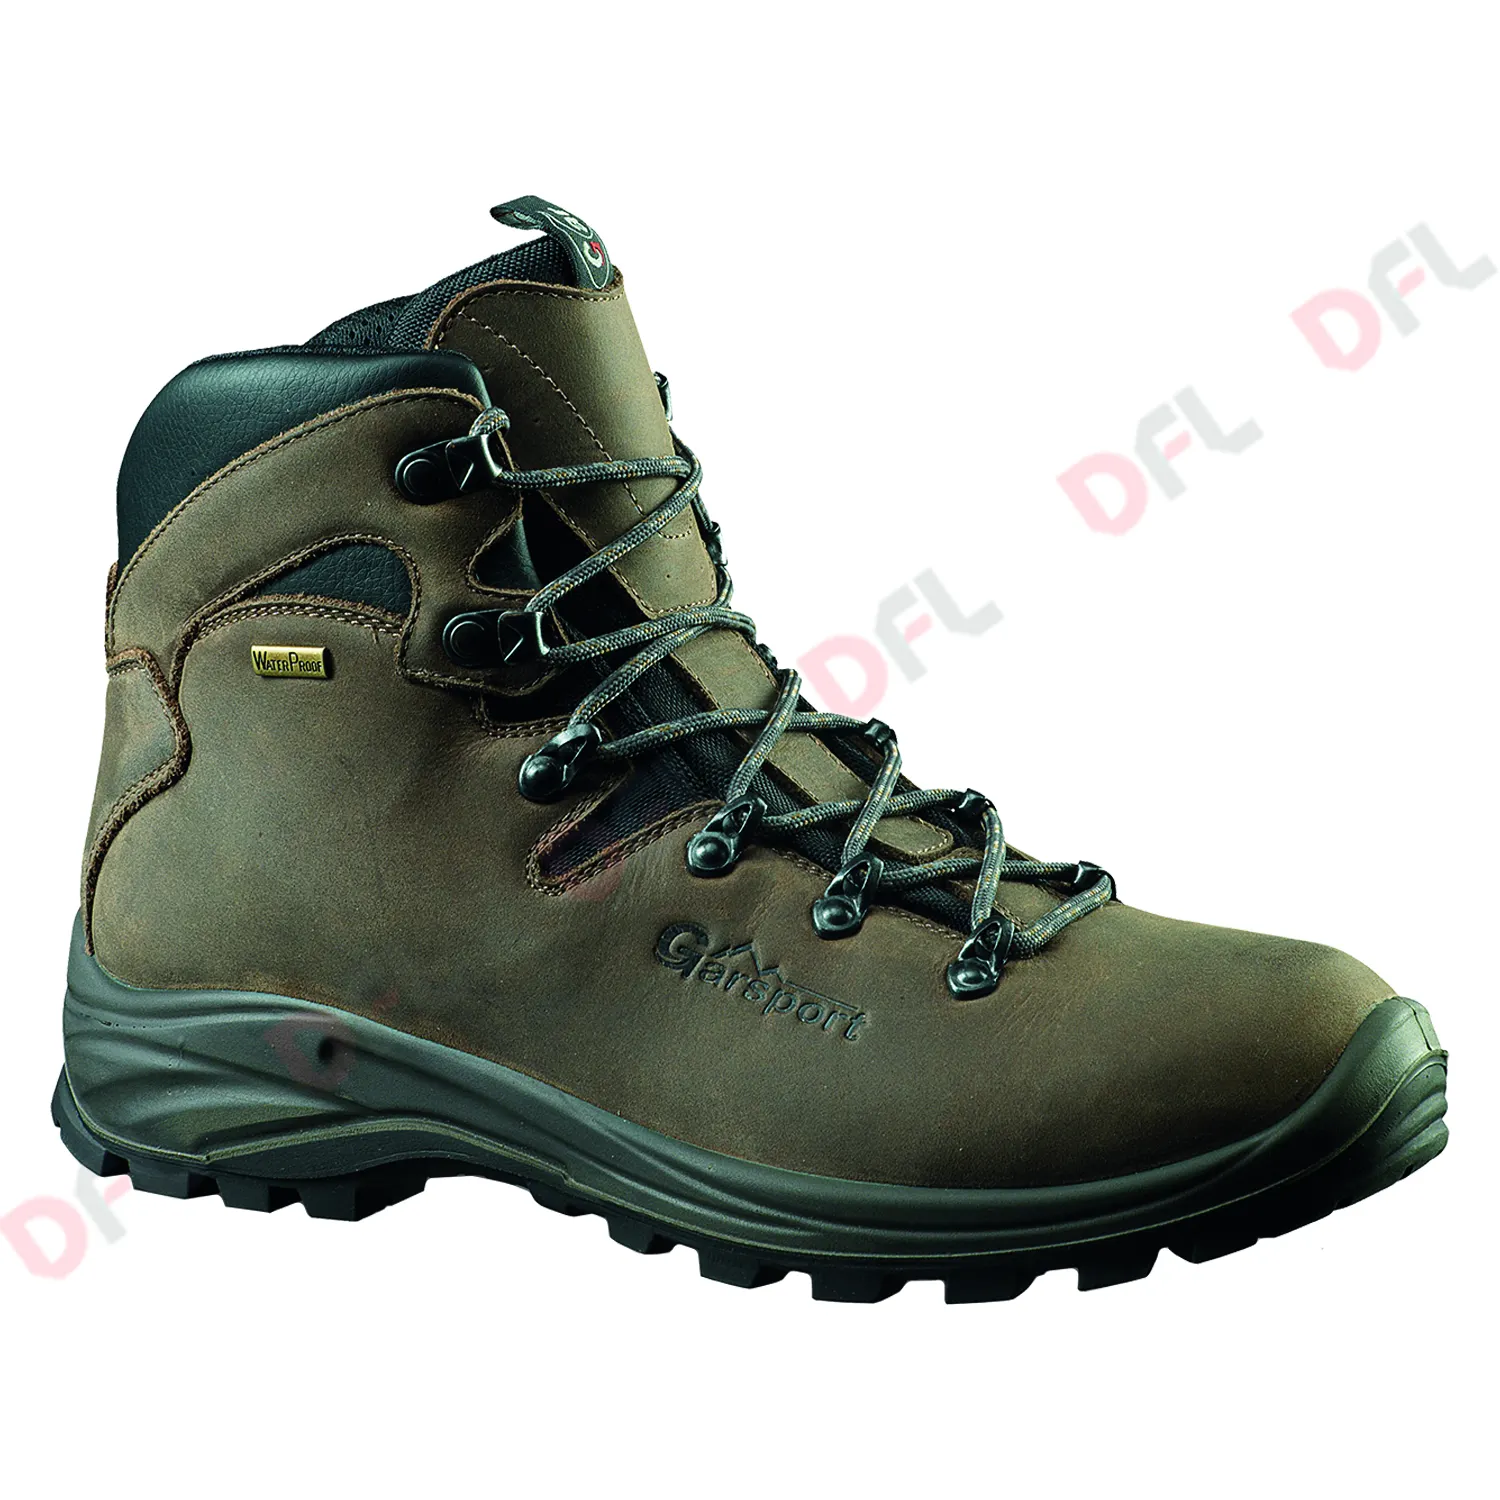 Excellent Quality Brown Color Waterproof And Breathable Hiking Boots With Removable Insole For Adult